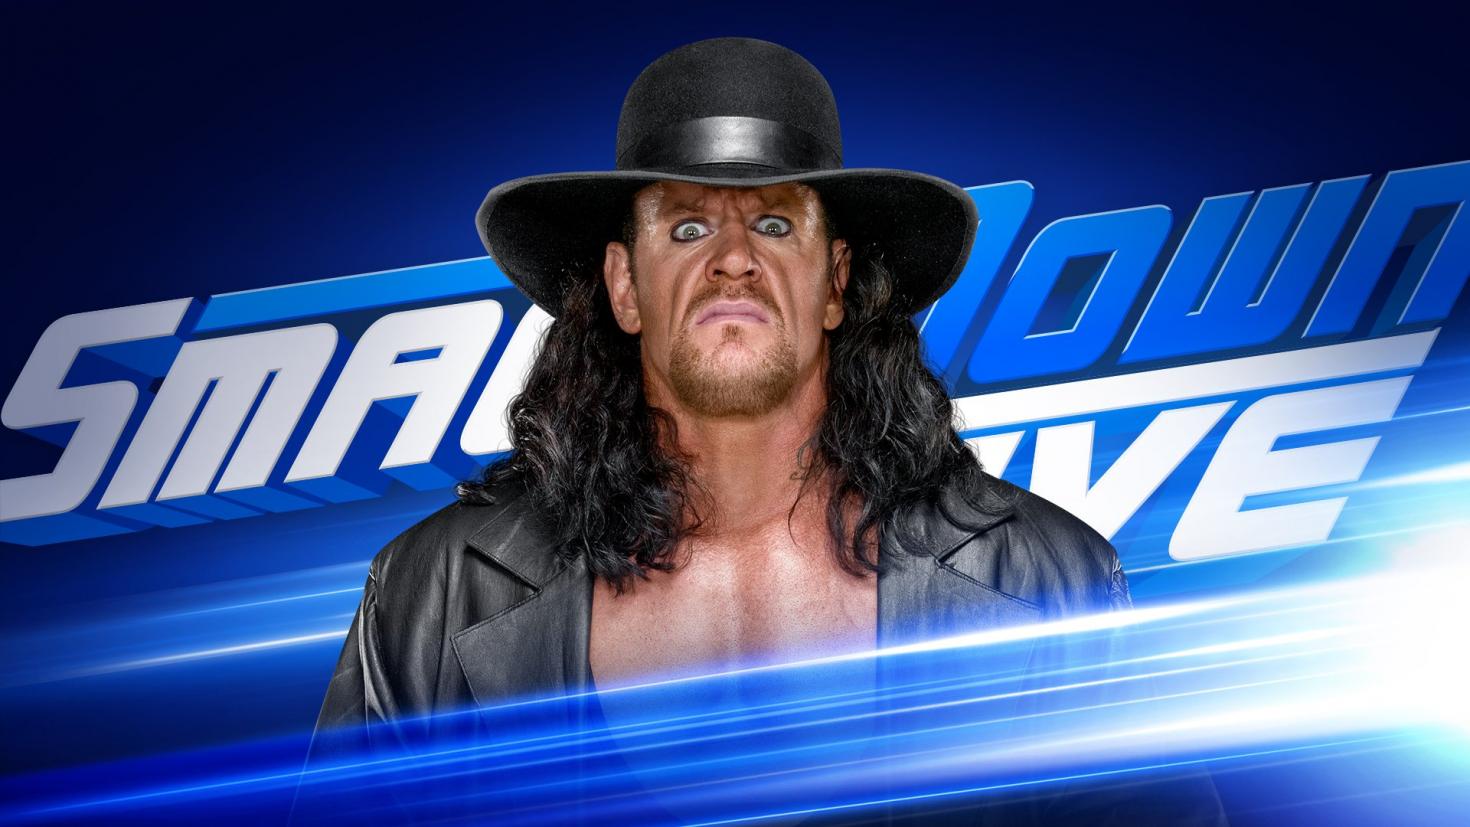 EXCLUSIVE: Possible Spoiler for The Undertaker at SmackDown 1000